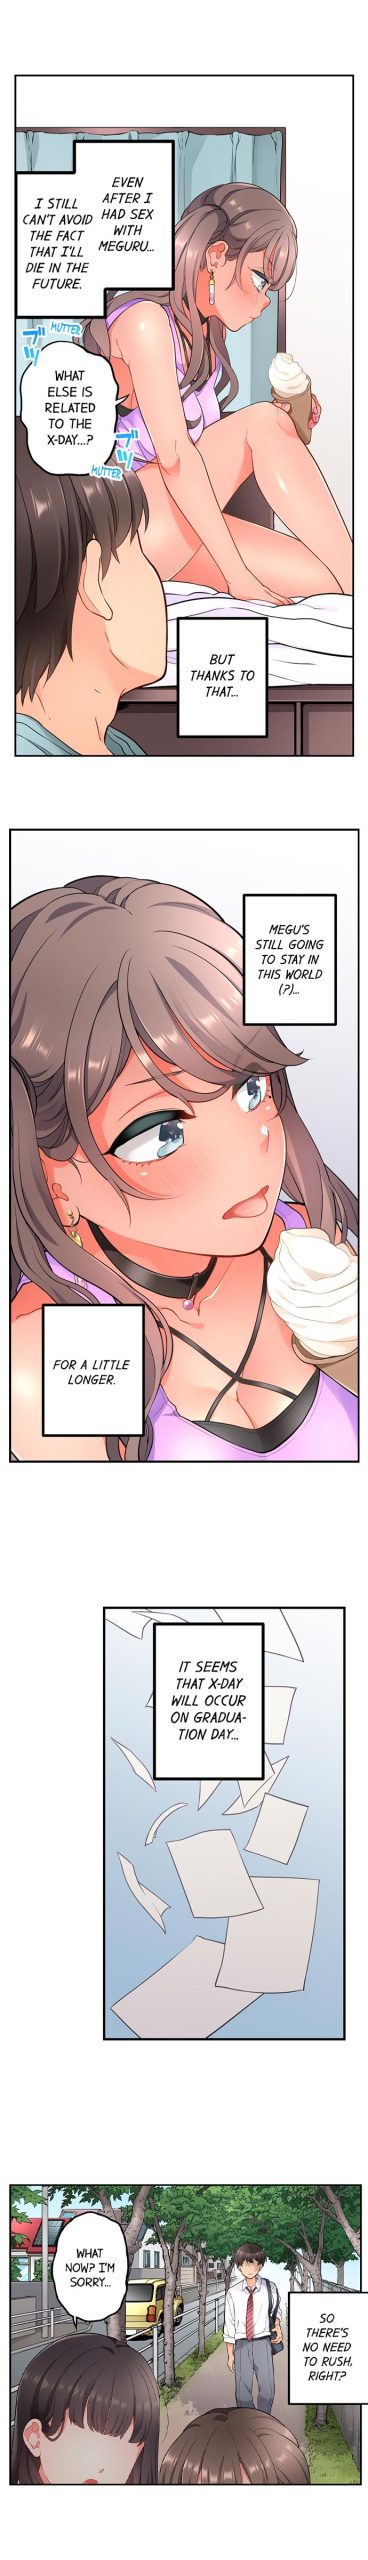 My Friend Came Back From The Future To Fuck Me (Chapter 7-14) porn comic picture 22